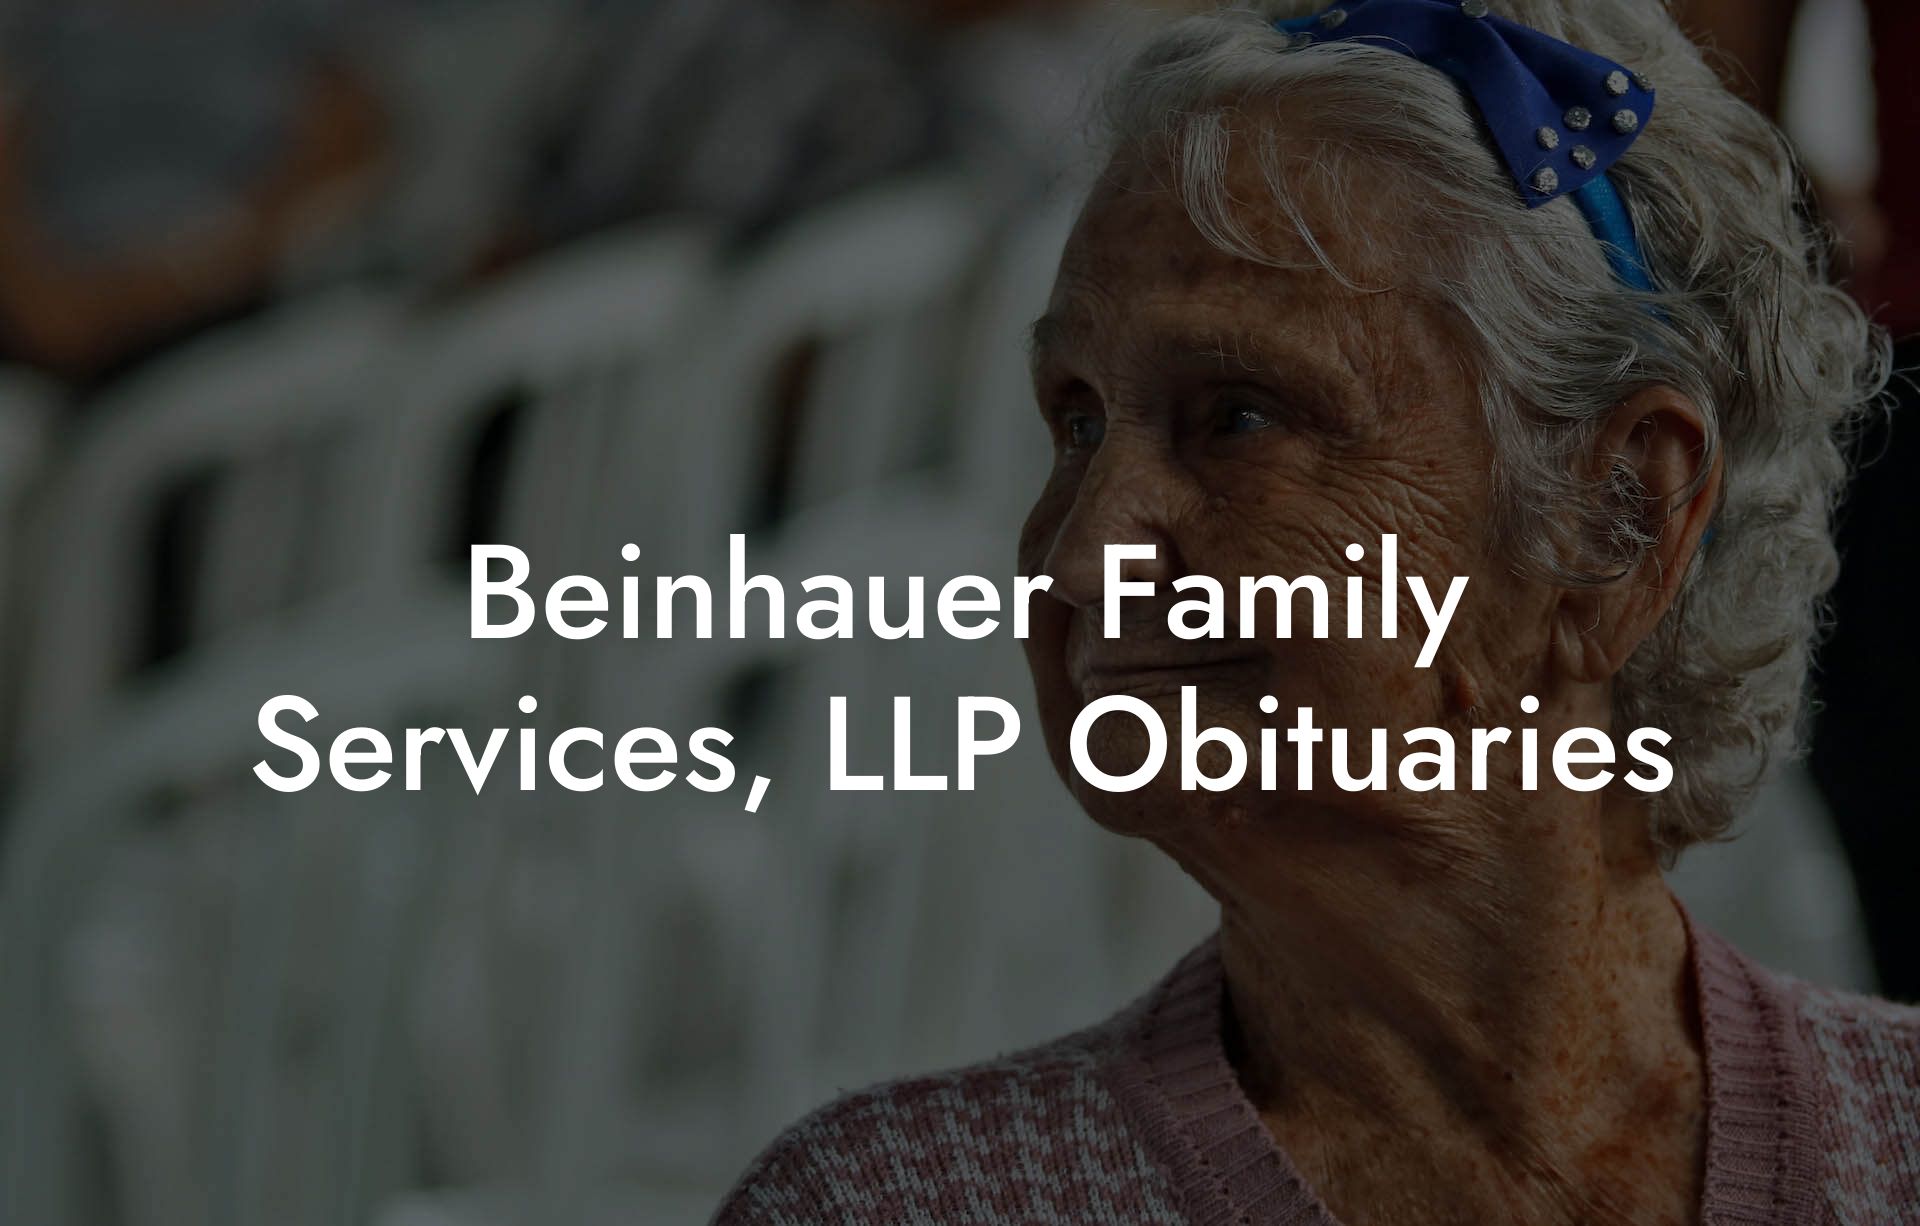 Beinhauer Family Services, LLP Obituaries